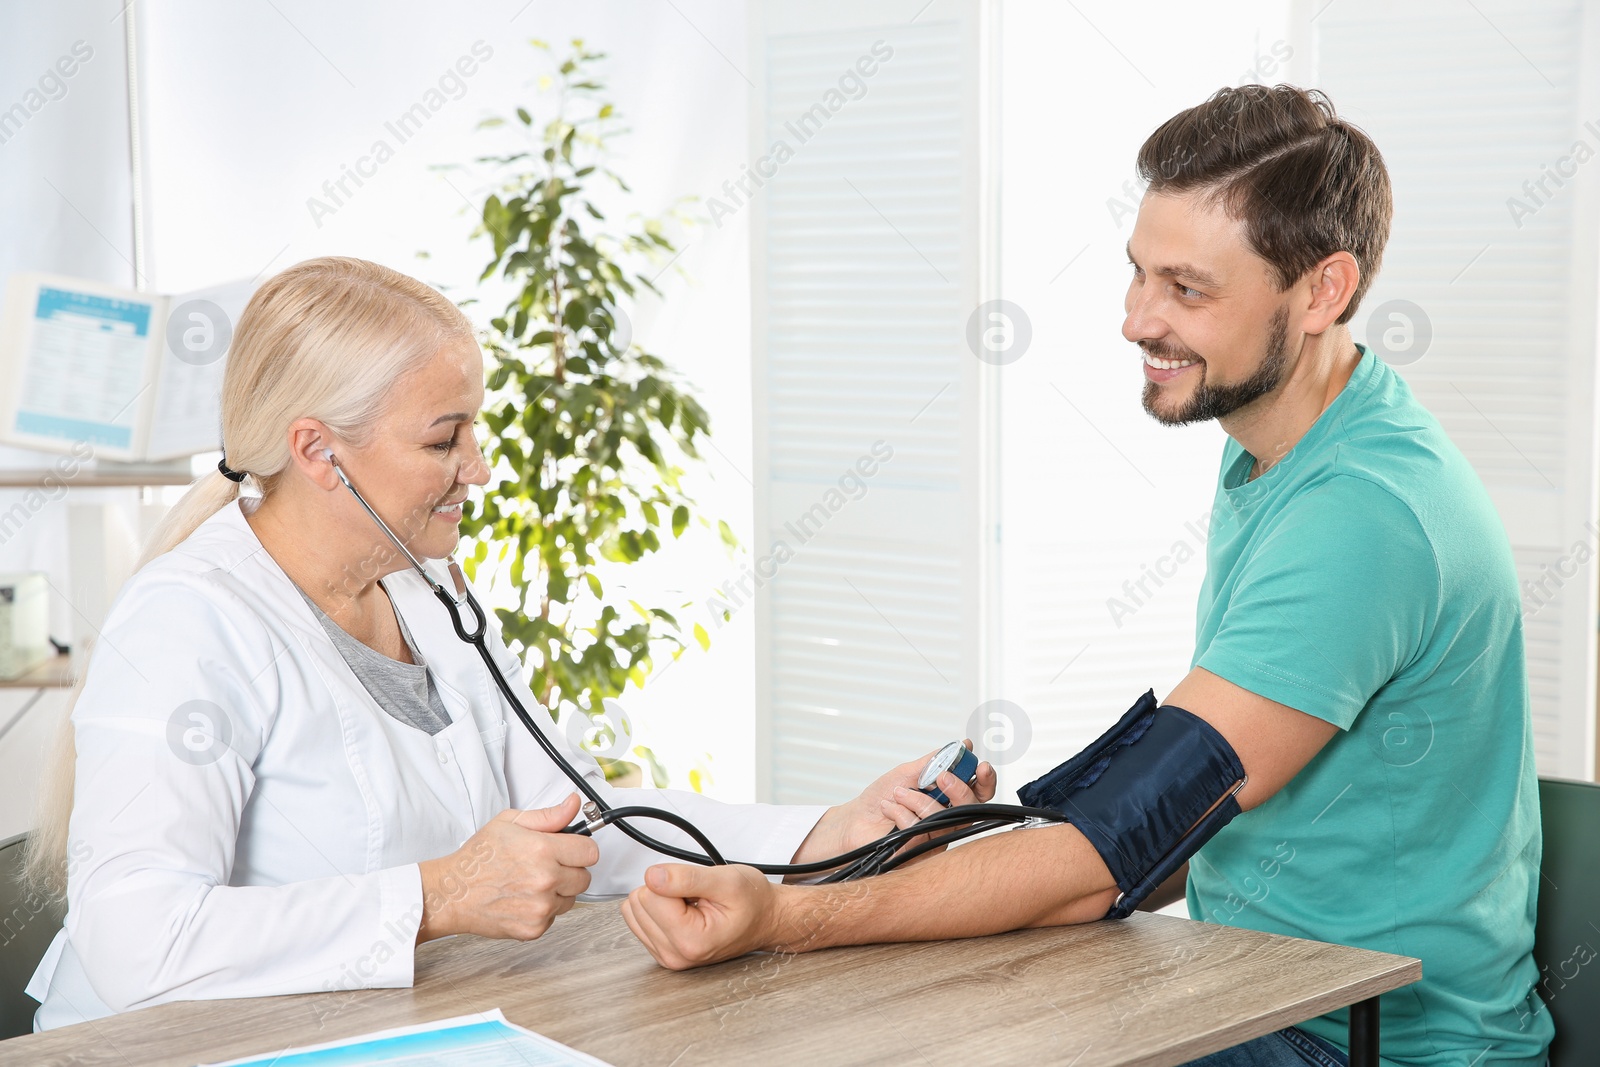 Photo of Man visiting doctor in hospital. Measuring blood pressure and checking pulse